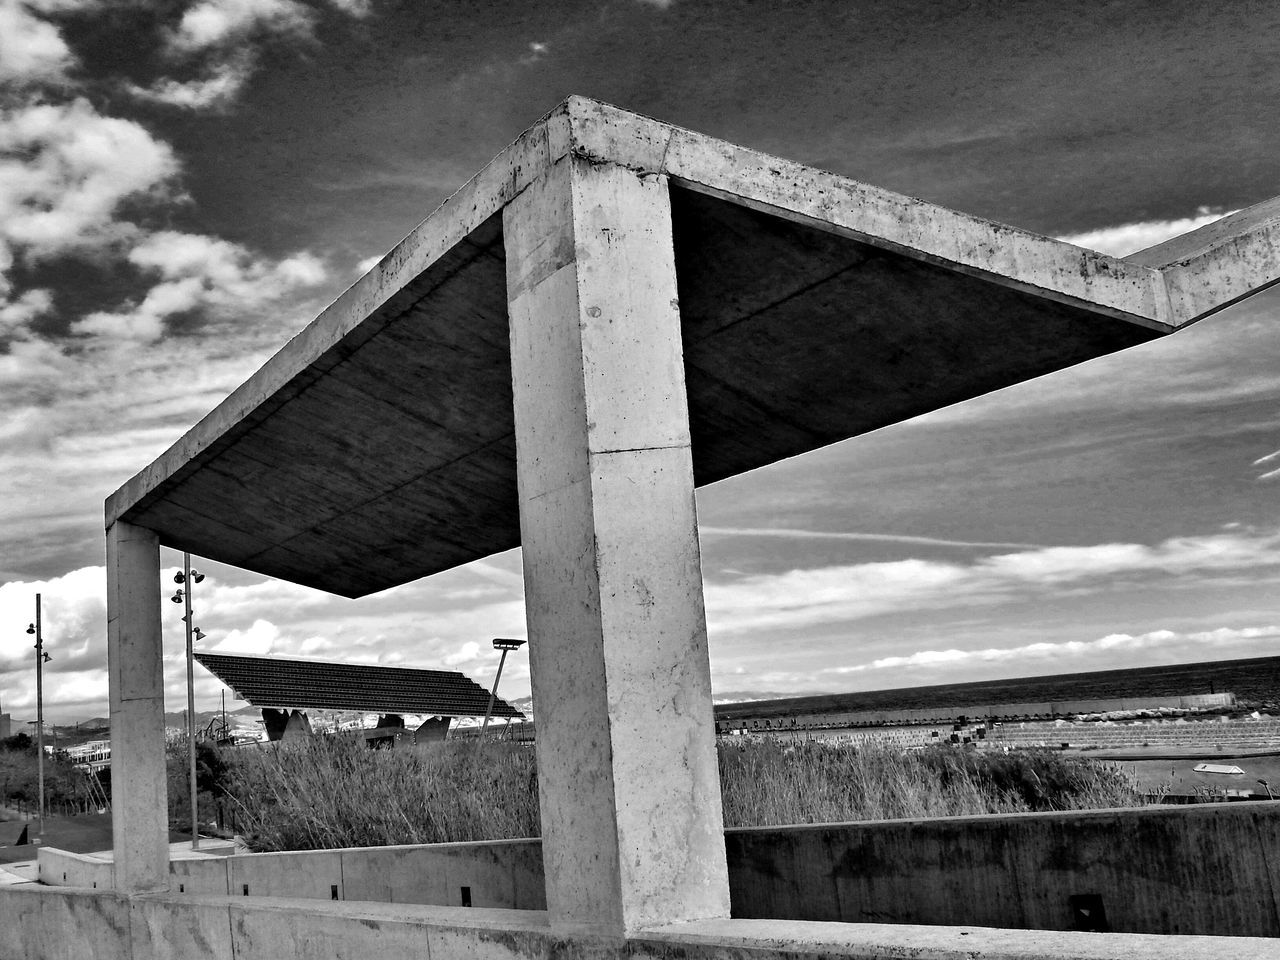 built structure, architecture, sky, cloud - sky, building exterior, cloudy, low angle view, cloud, no people, day, outdoors, old, wood - material, sunlight, architectural column, abandoned, nature, beach, weather, fence